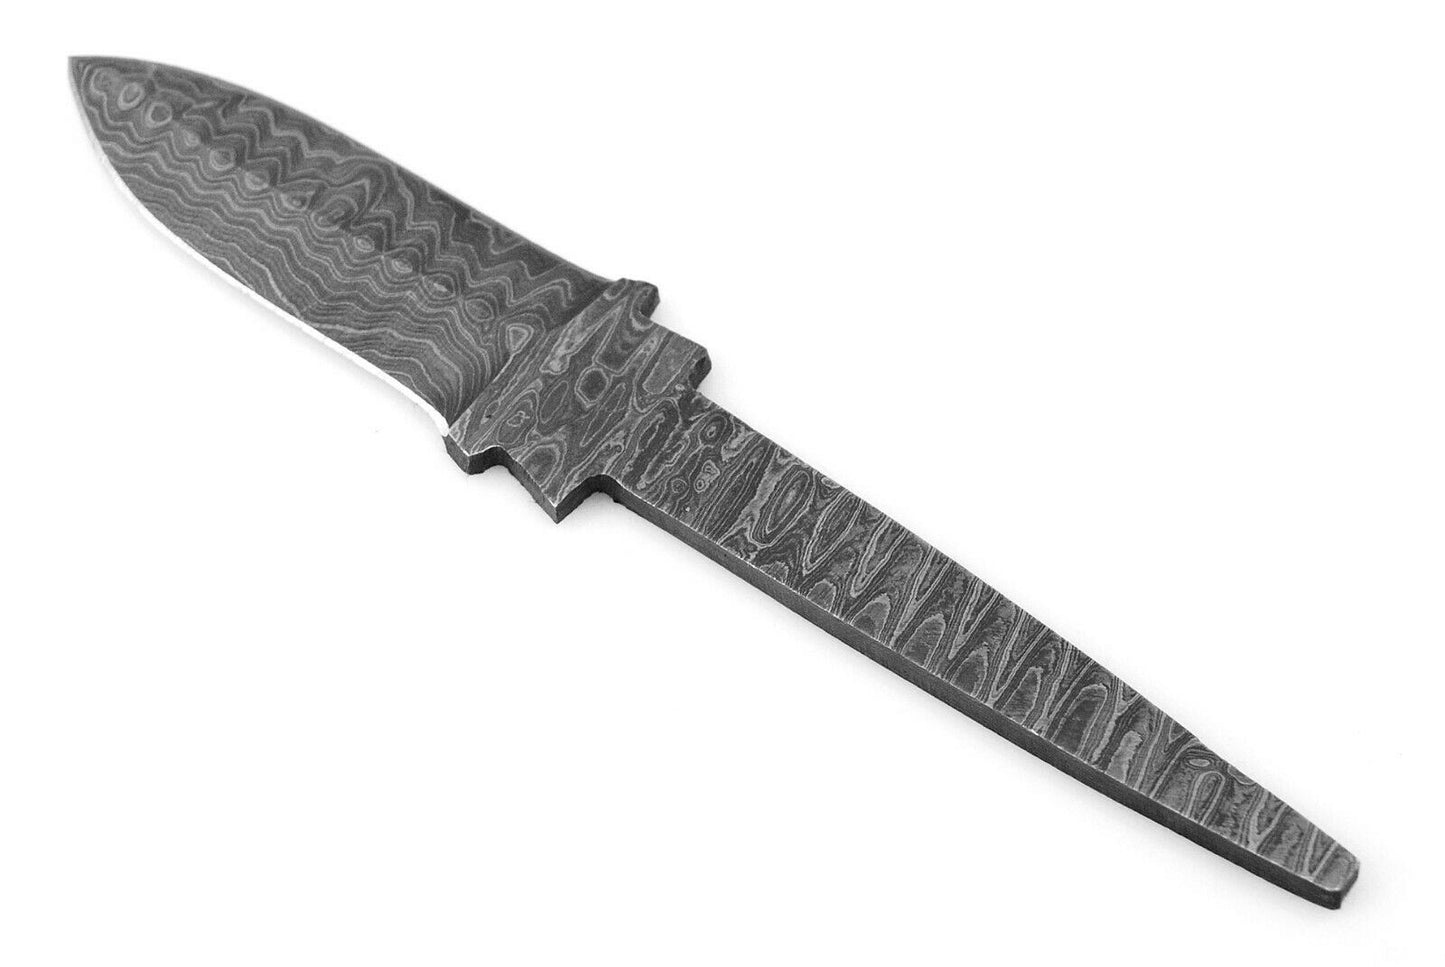 Hand Forged Damascus Steel Full Tang Dagger Blank Blade Knife Making Supply-818